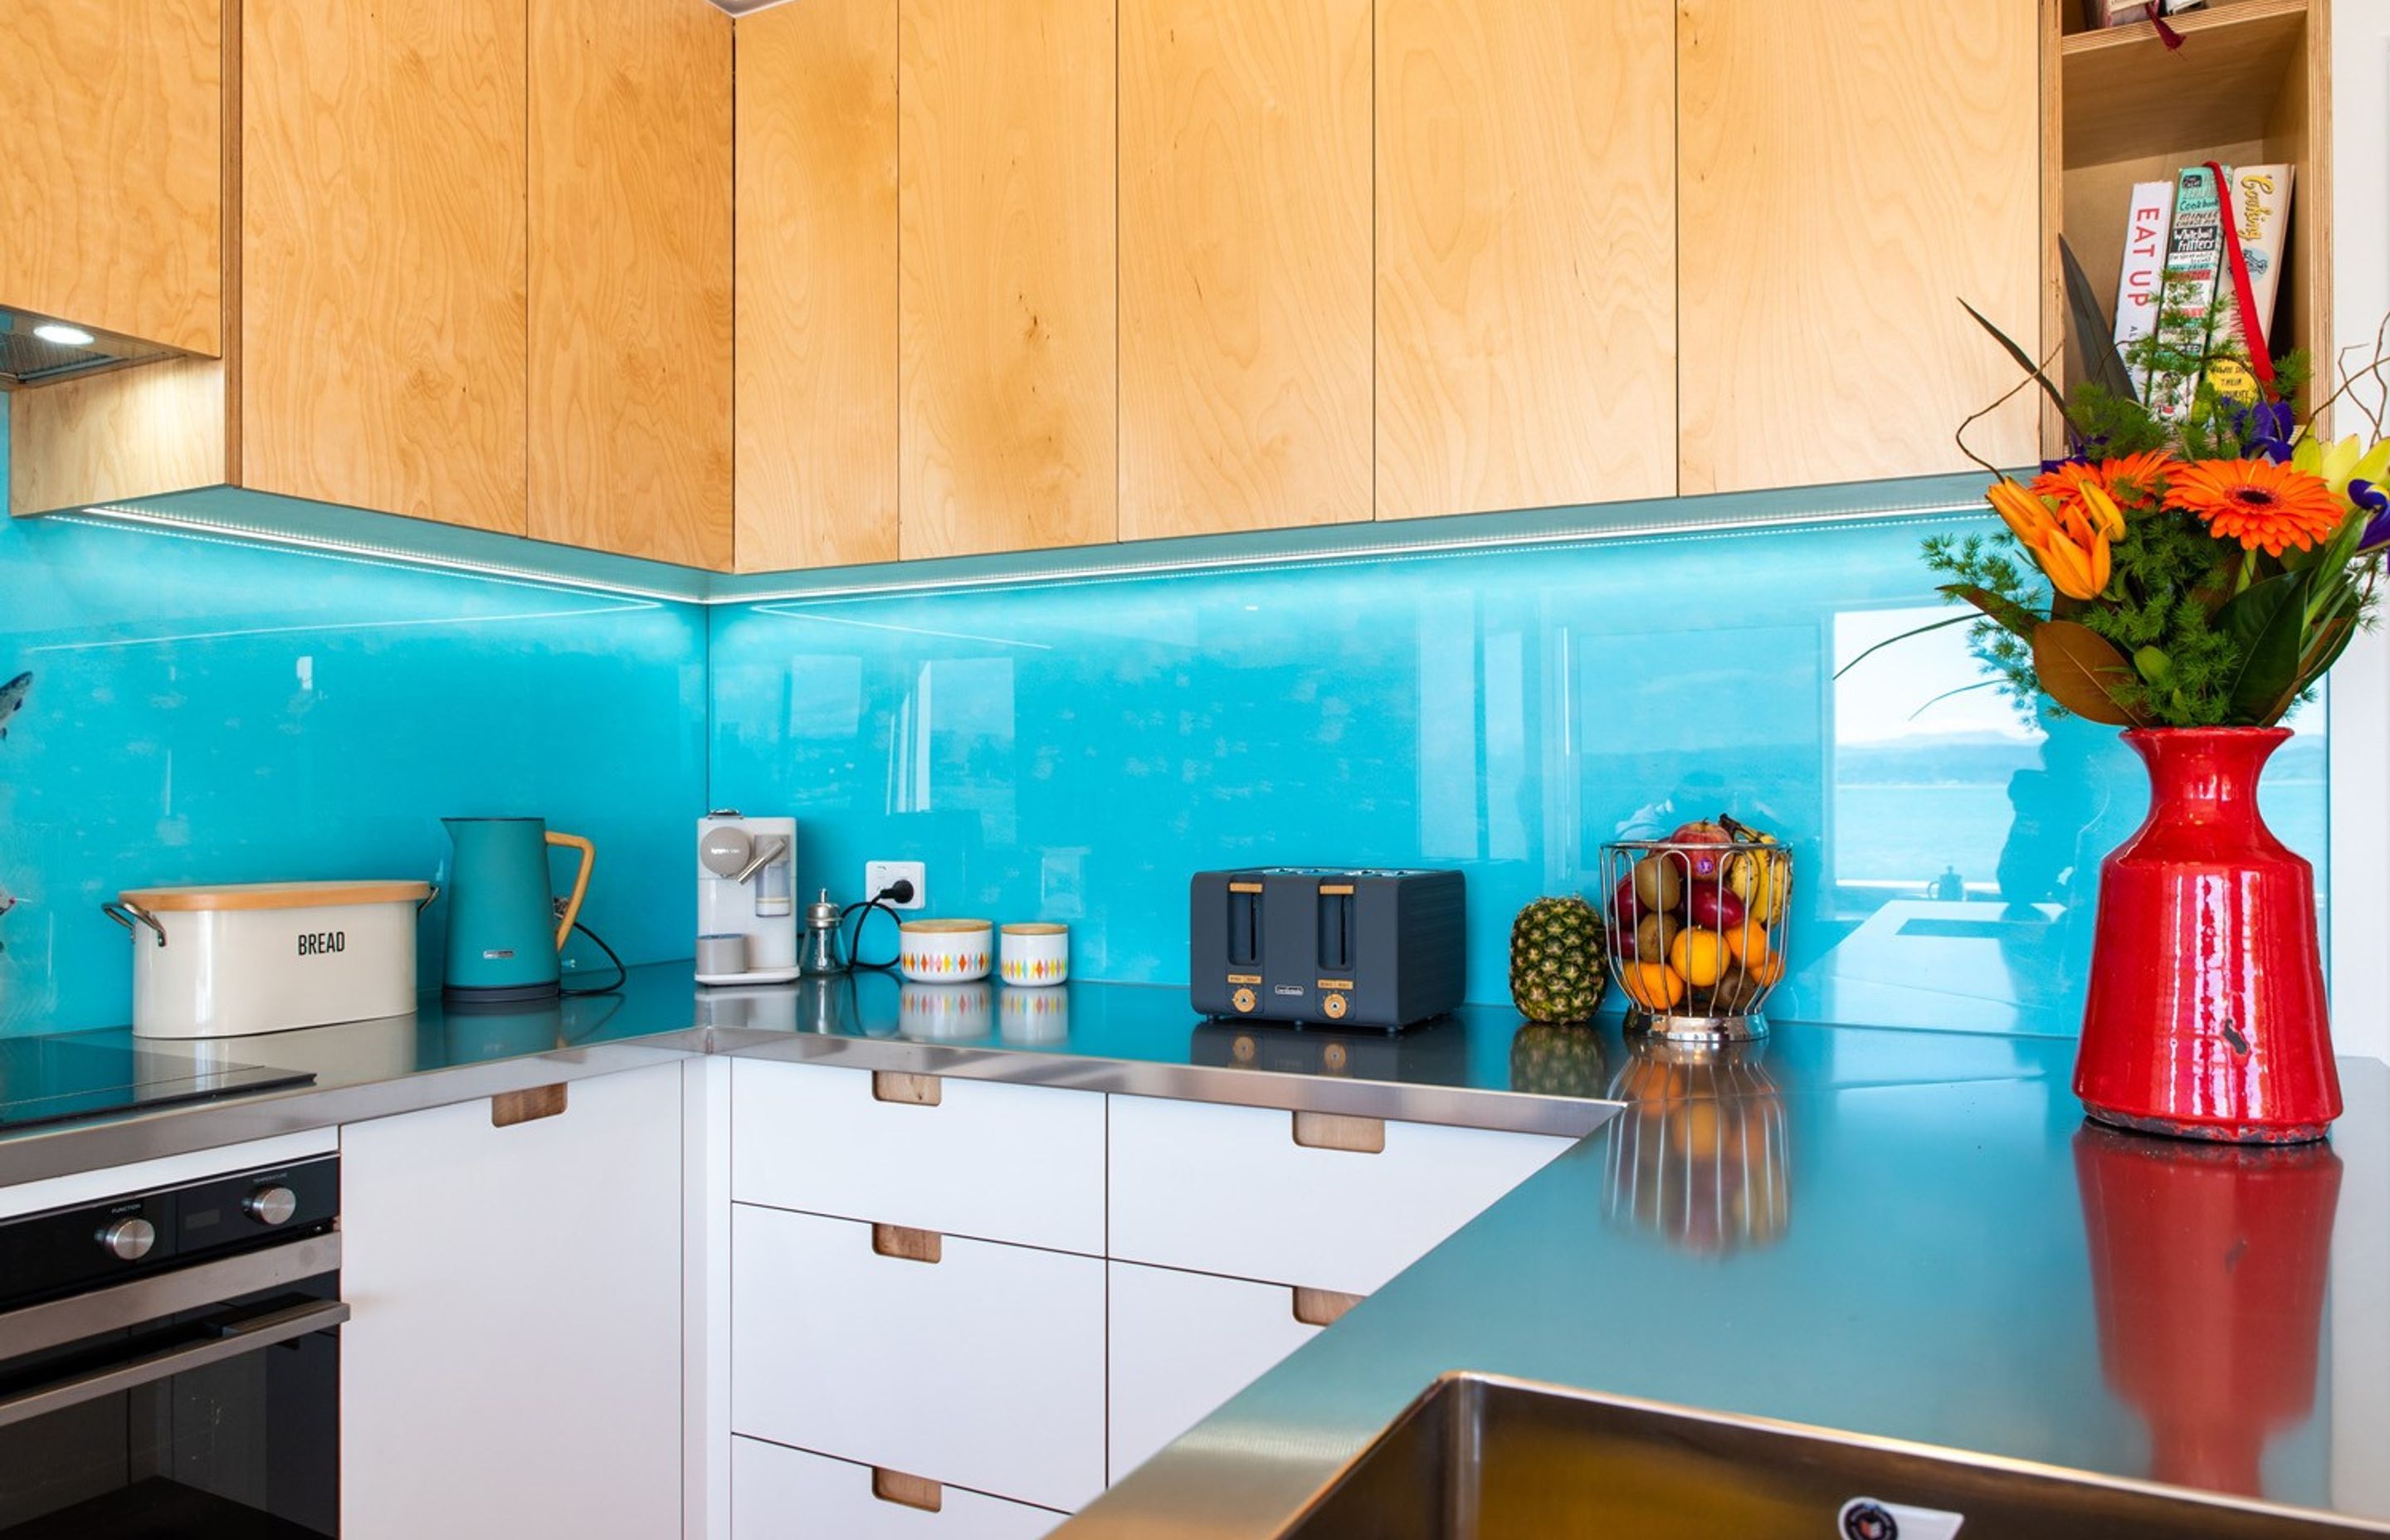 Plywood Kitchen with a colourful twist